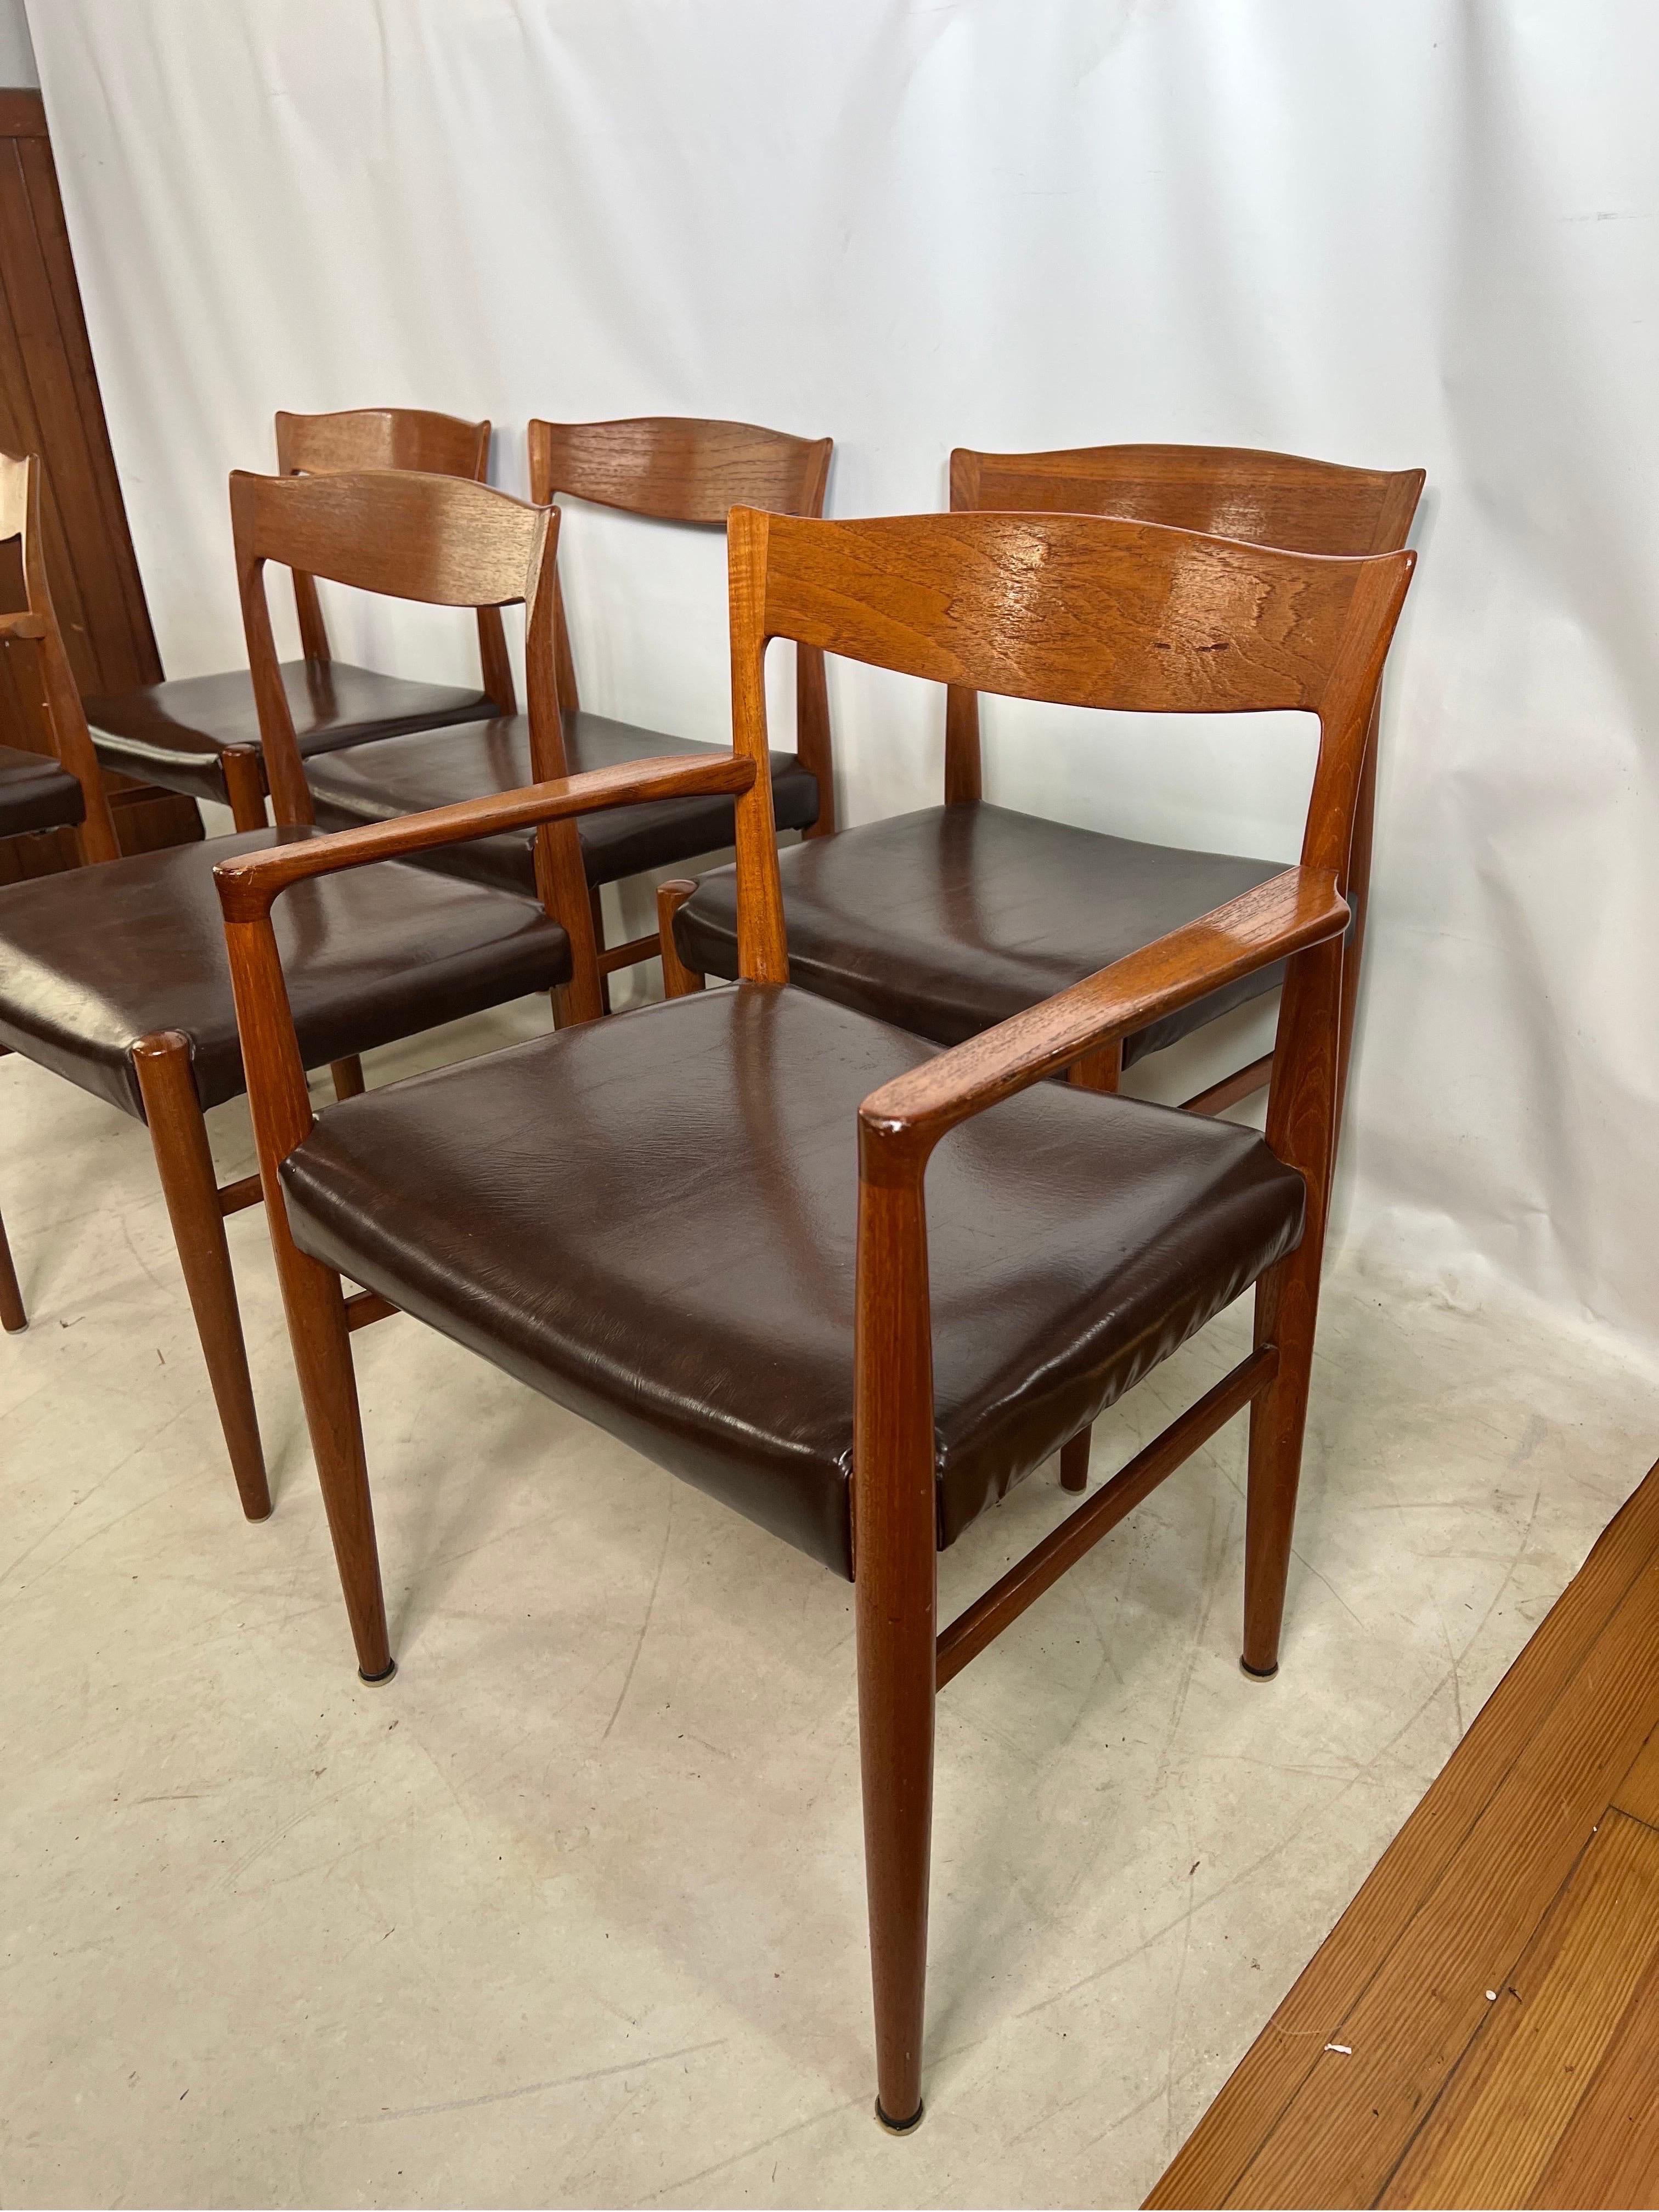 This set of 6 Vintage Danish Teak Sculptural Dining Chairs is a true testament to mid-century design and craftsmanship. Made from high-quality teak wood, these chairs feature a unique sculptural design that adds elegance and sophistication to any